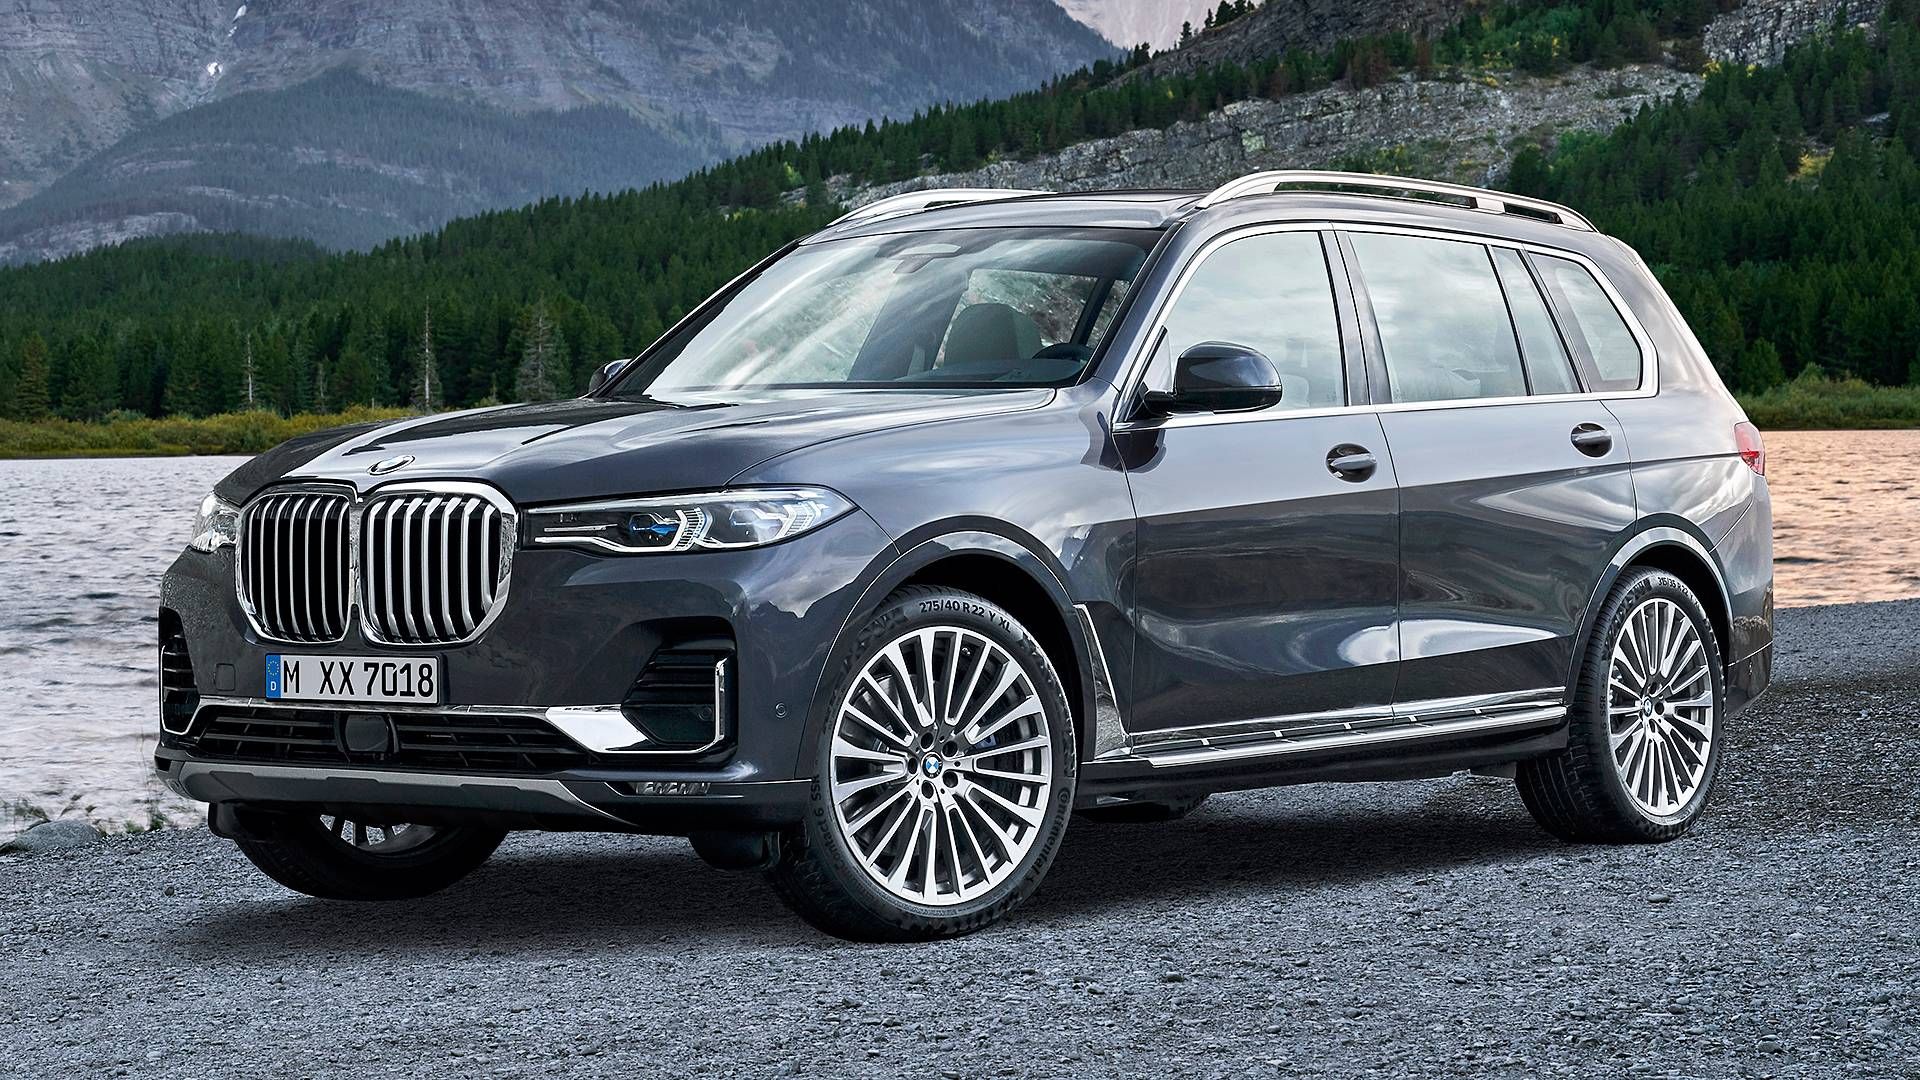 BMW X7 Review: Expected Release Date, Prices, MPG And Changes